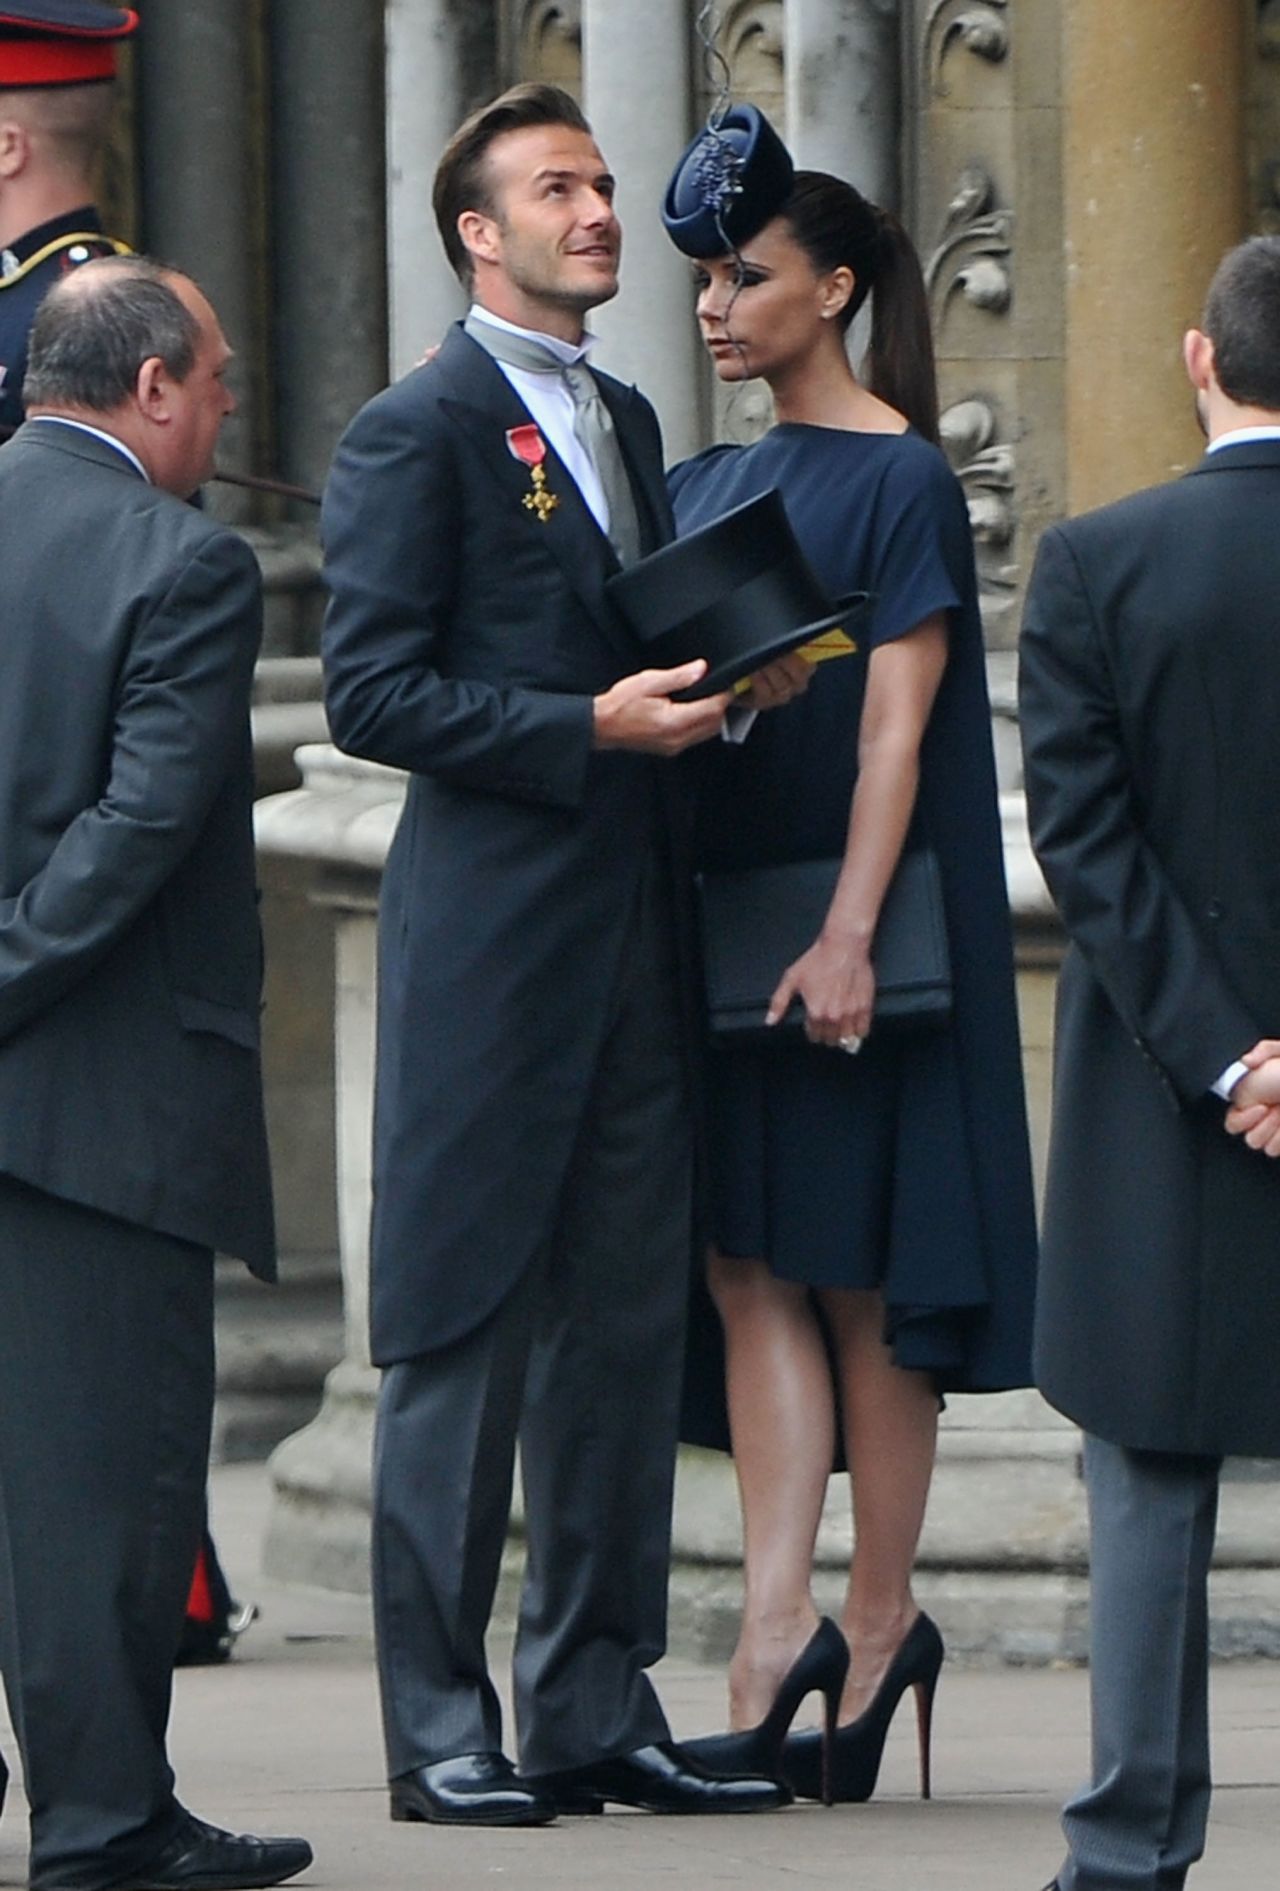 In 2011, they attended the British royal wedding of Prince William to Catherine Middleton.